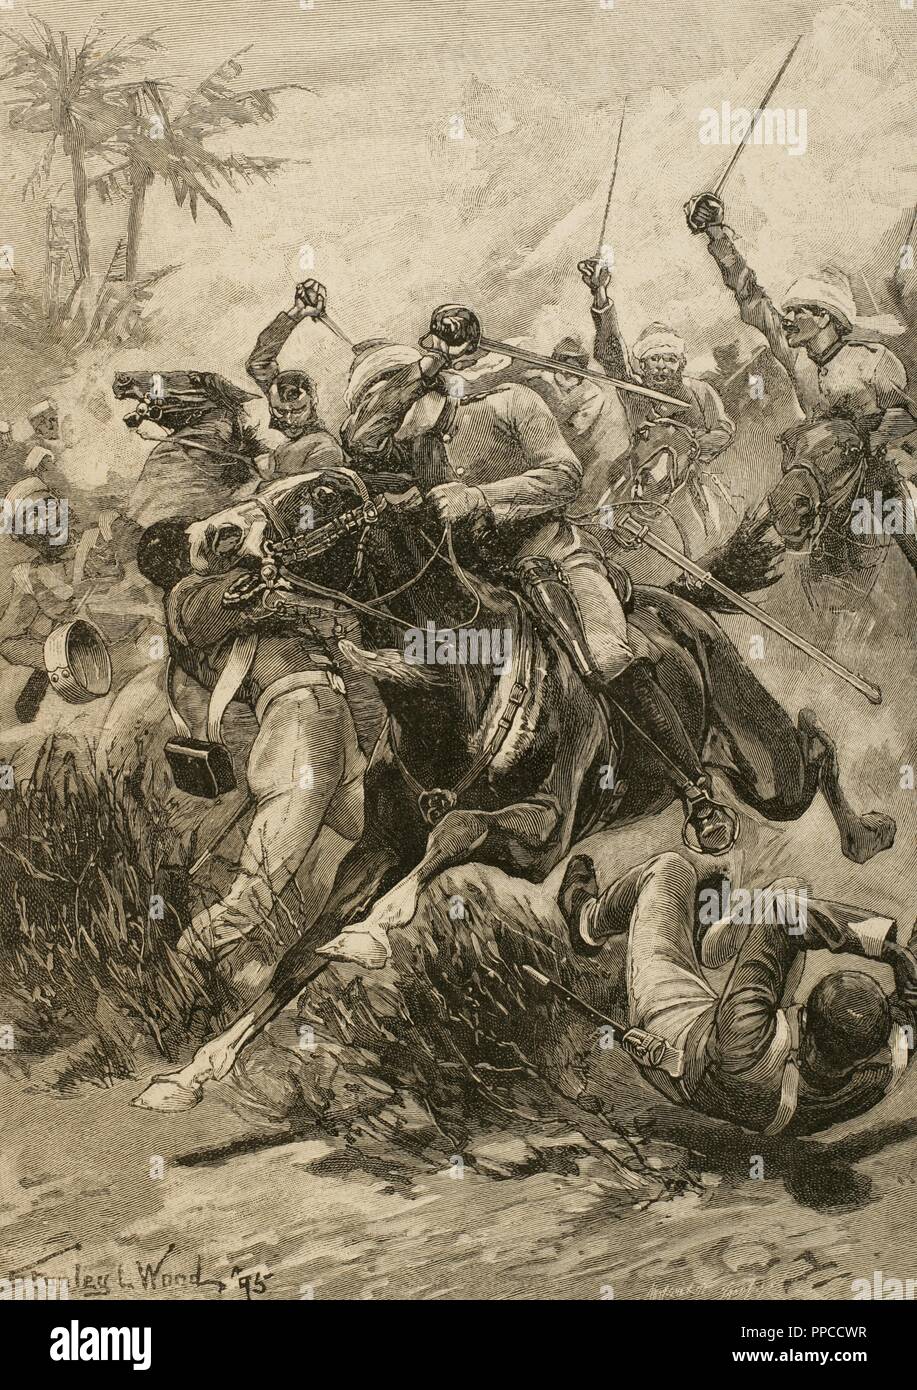 India. Sepoy Rebellion (1857). India revolution that erupted as a reaction against British colonial policy. In 1857 the sepoys revolted and deprived of all authority to the East India Company (1858). Charging the British Cavalry in Lucknow, 1857. Drawing by Stanley L. Wood. Ilustracio n Ibe rica, 1898. Stock Photo